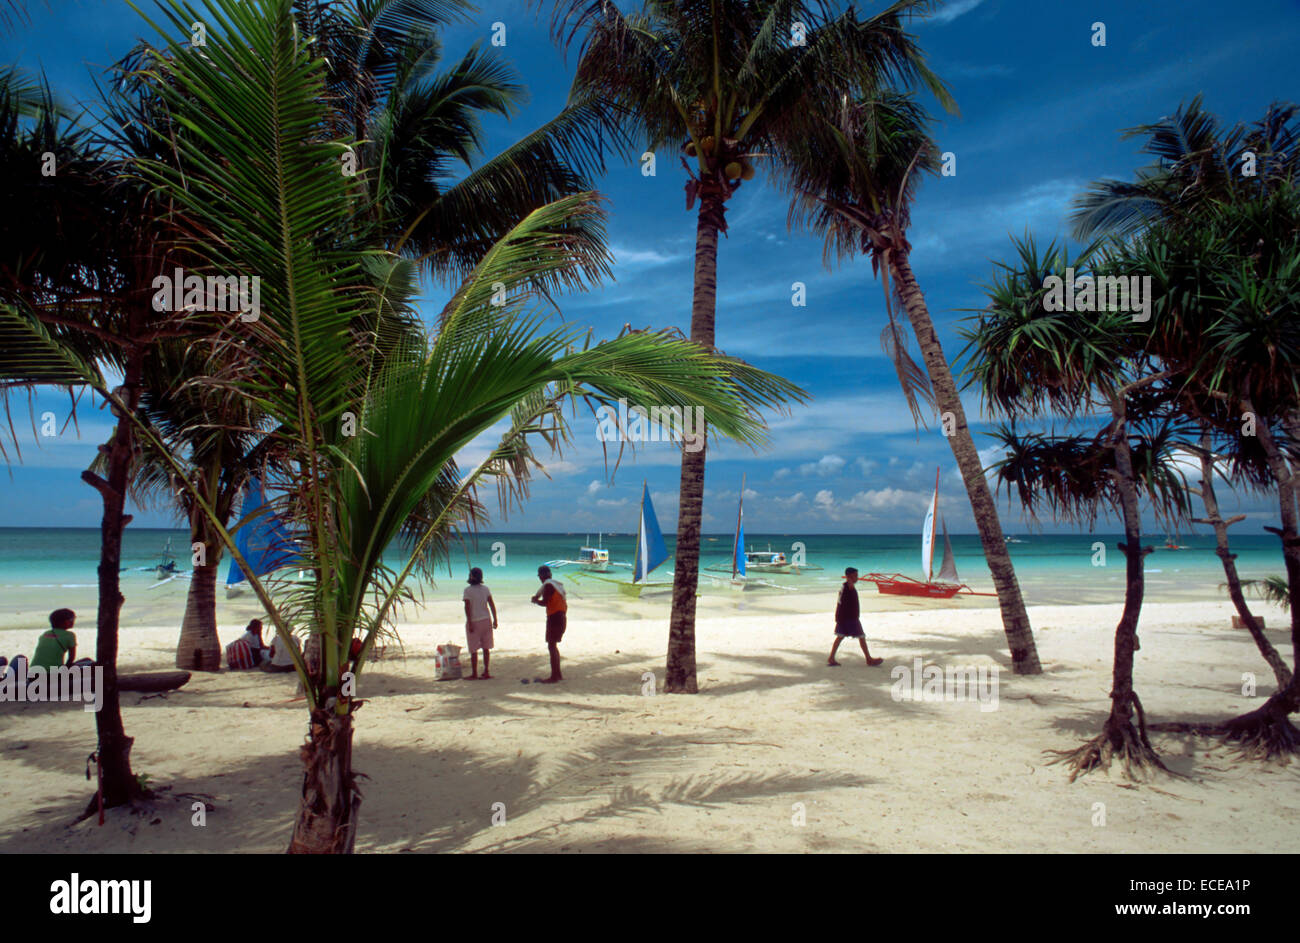 Landscape with palm trees. Bankas in White beach. Boracay. Philippines. Boracay Beach / Palm Trees & Sand, Boracay Island, Phili Stock Photo